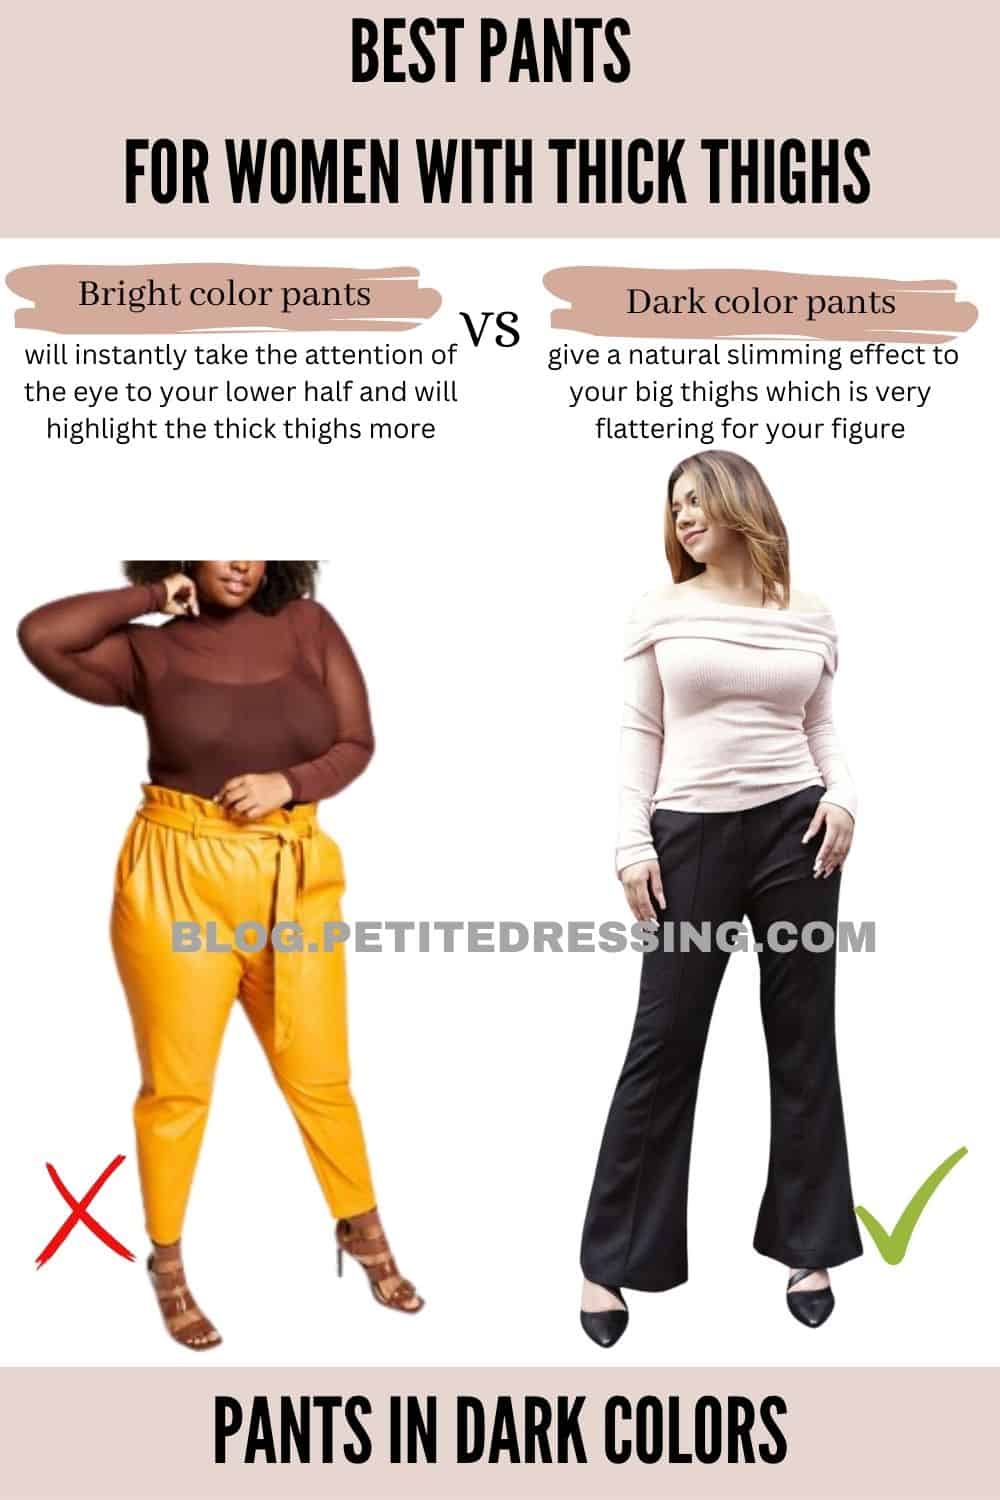 The Complete Pants Guide for Women with Thick Thighs